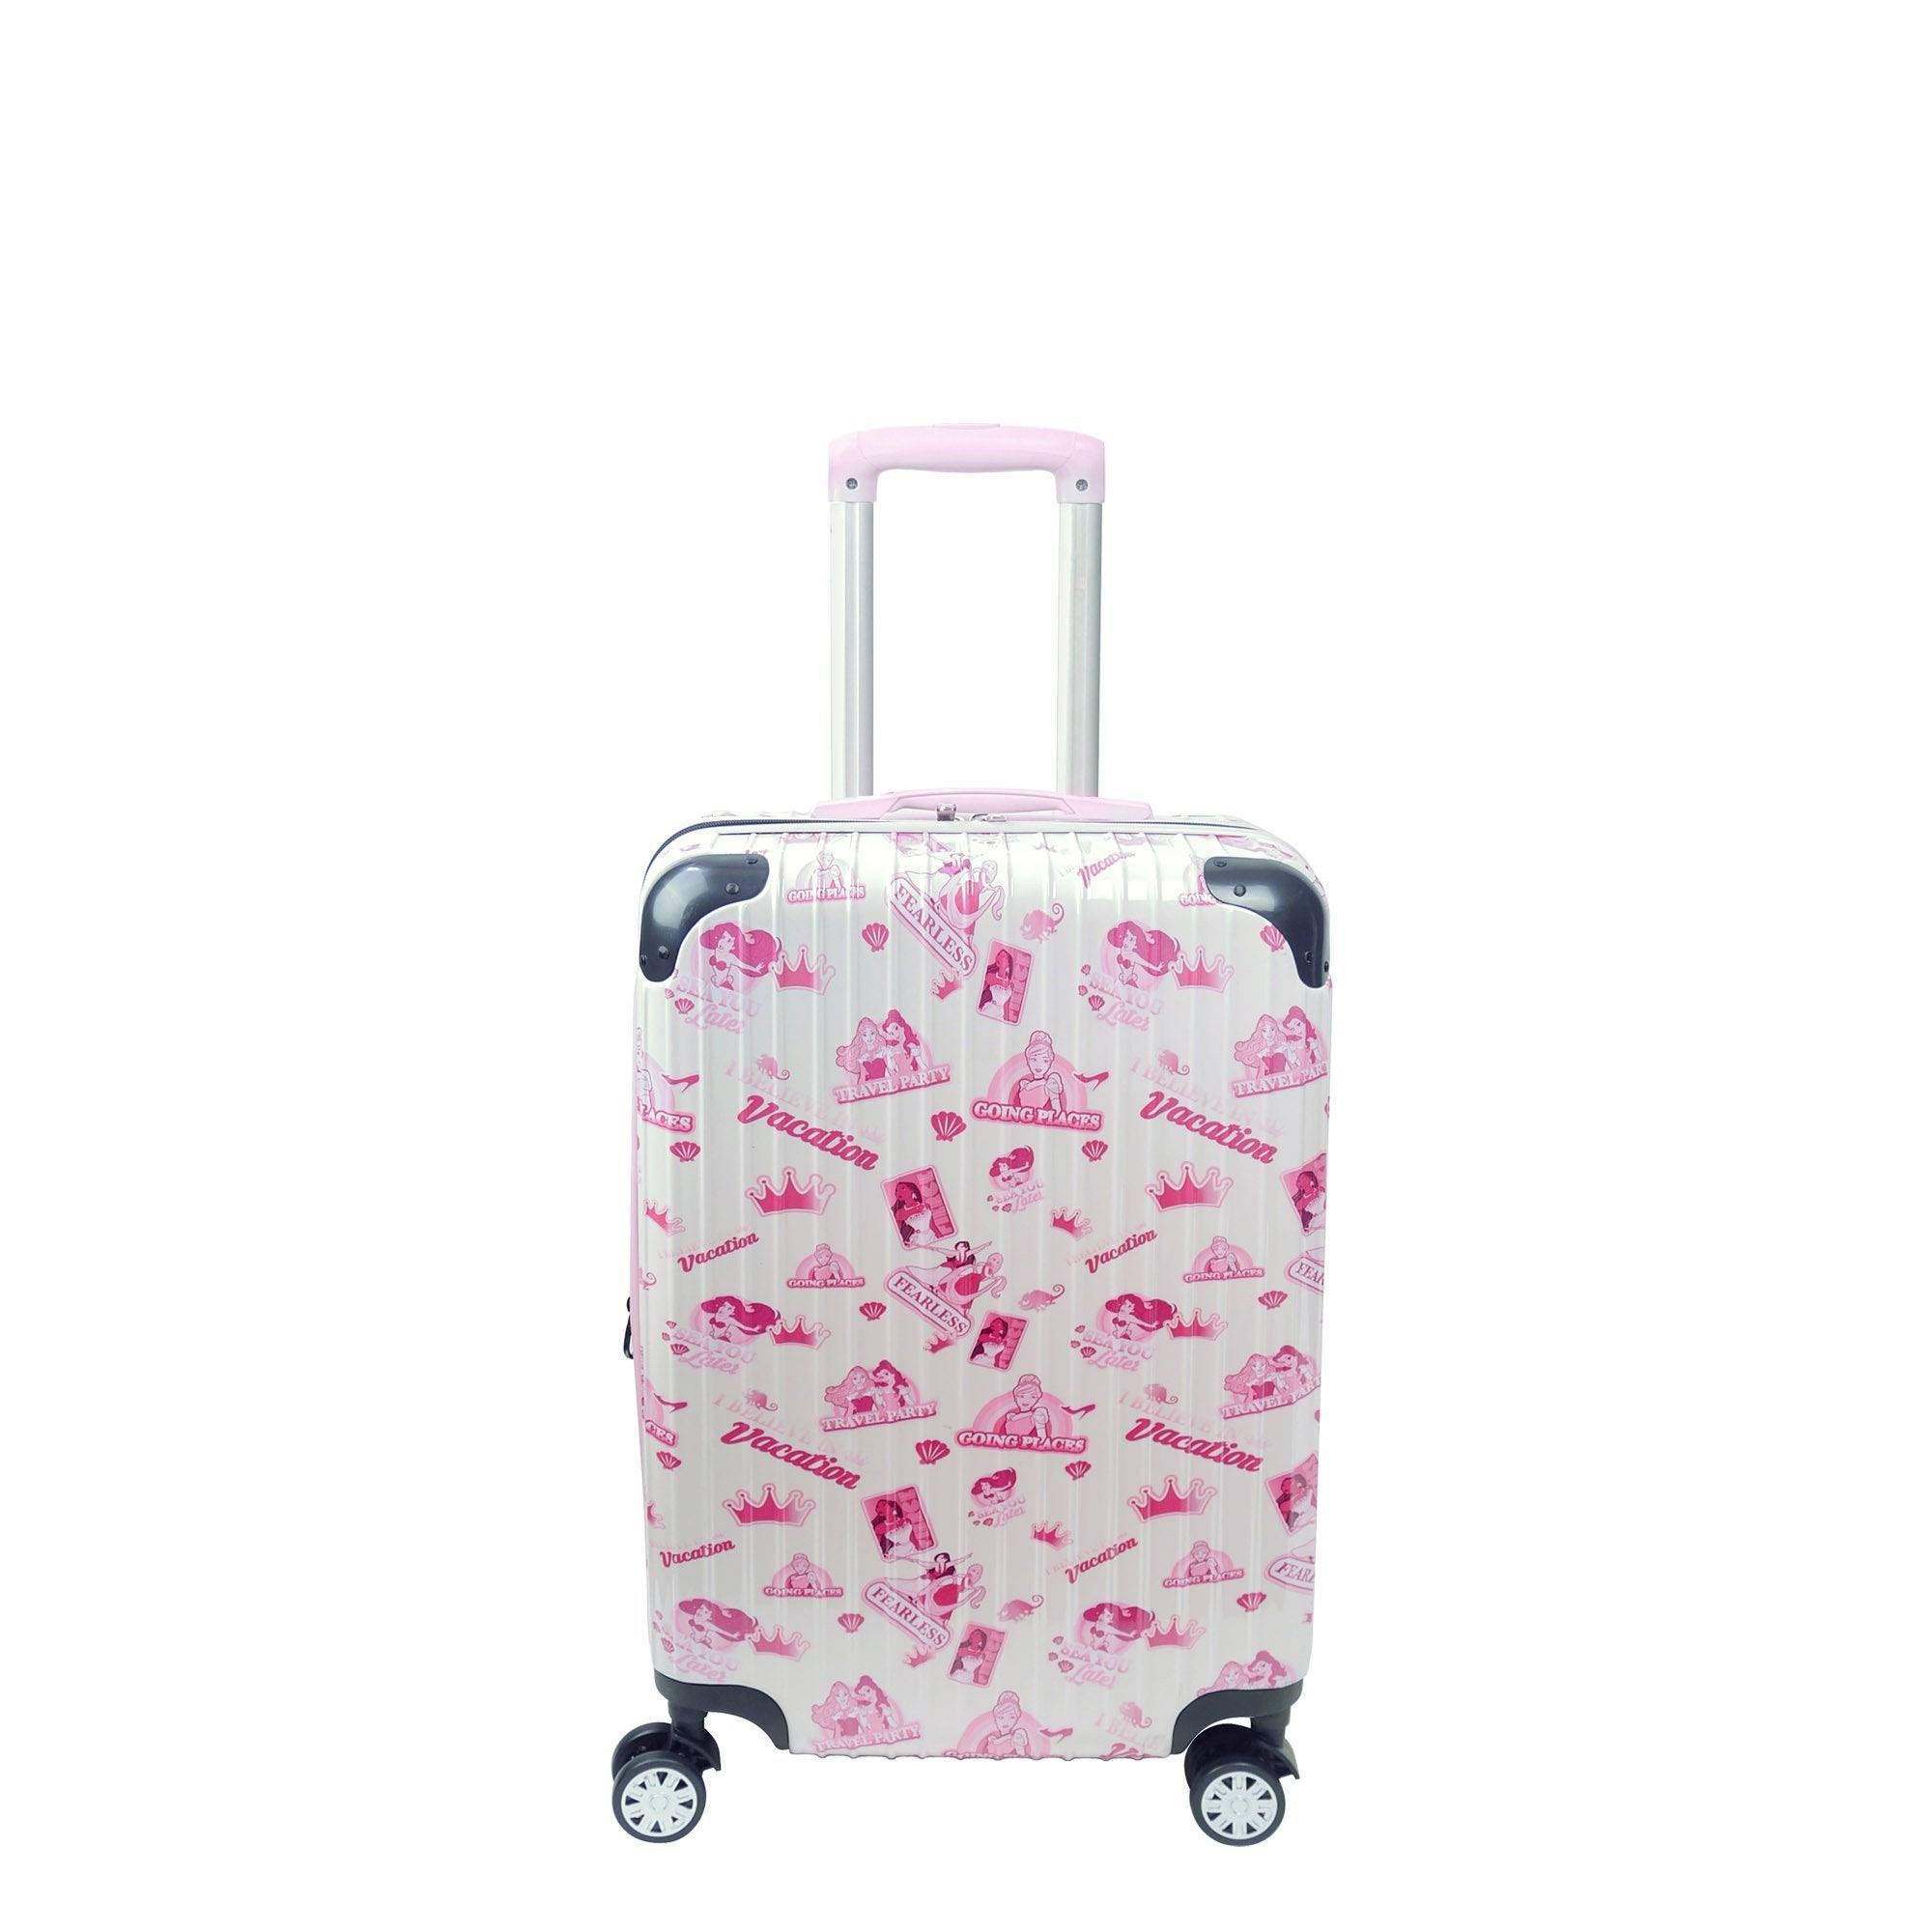 Ful Disney Princess 21 Inch Hard Side Carry On Spinner Luggage In White Pink My Leather Swear